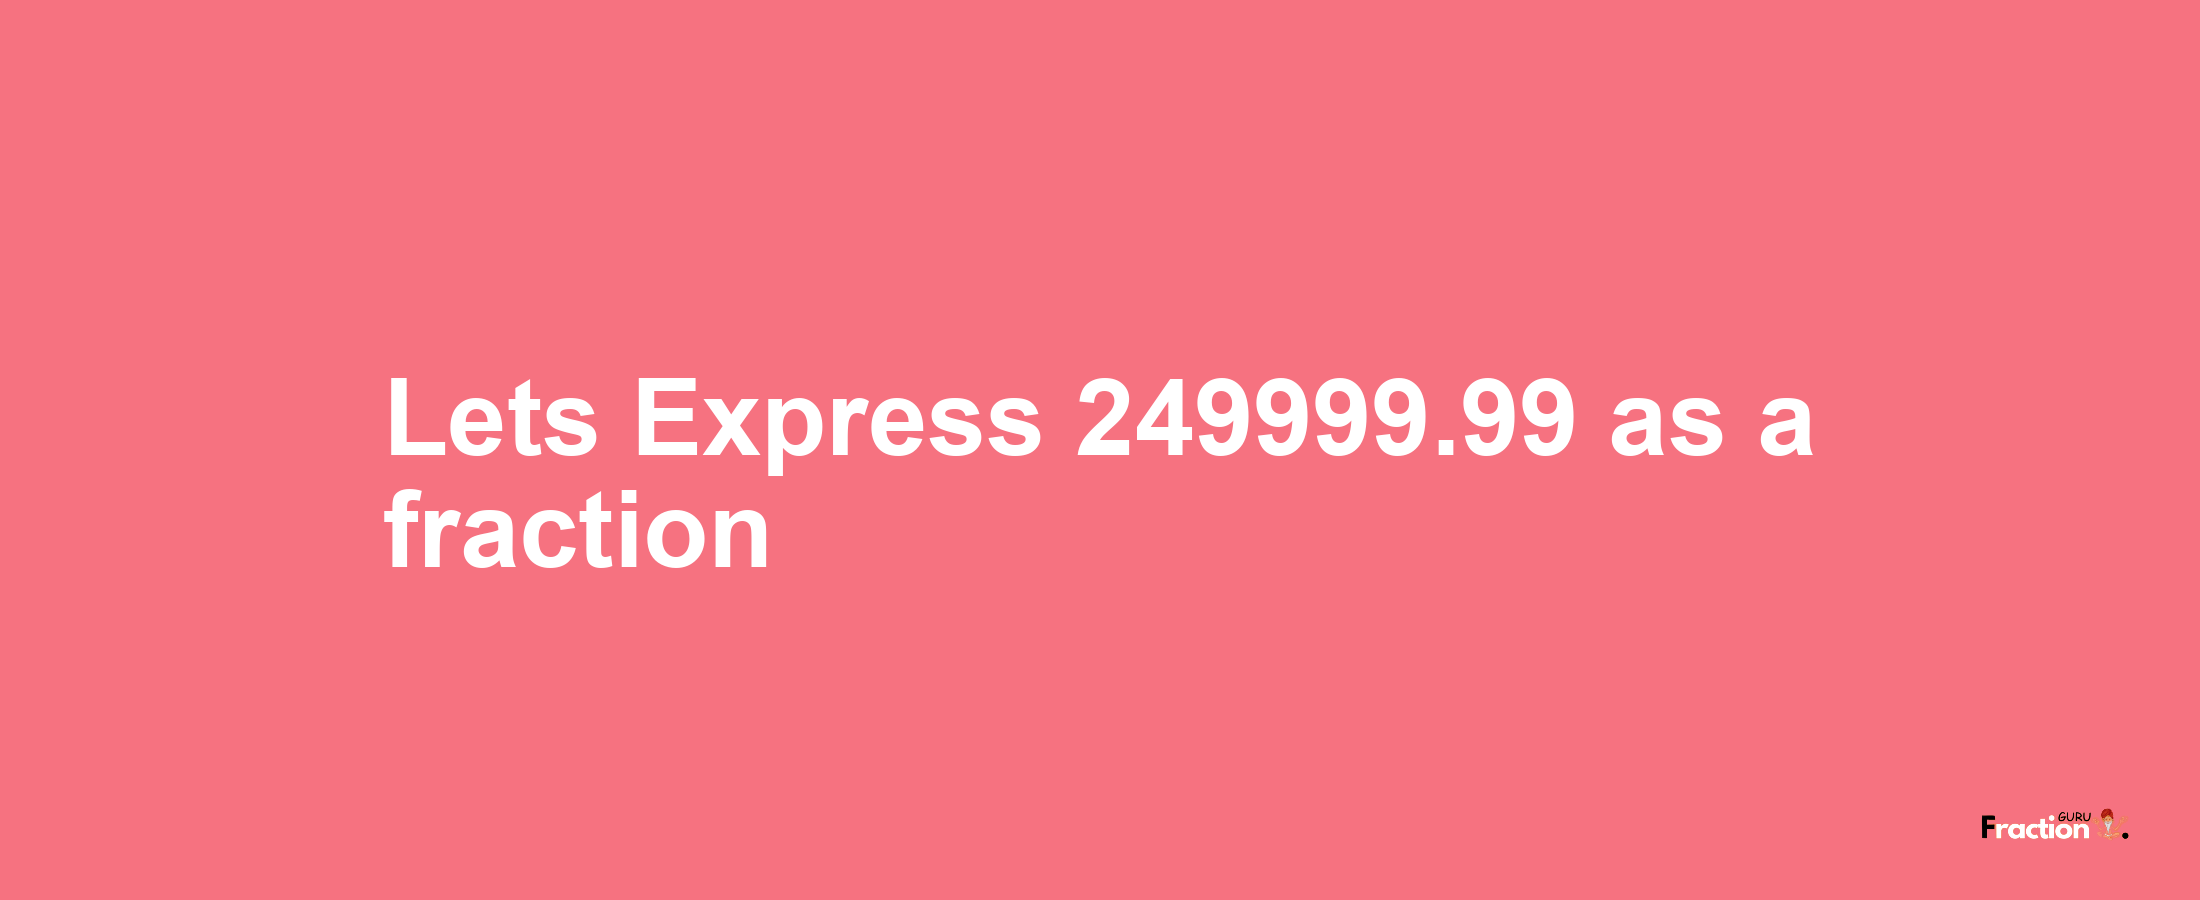 Lets Express 249999.99 as afraction